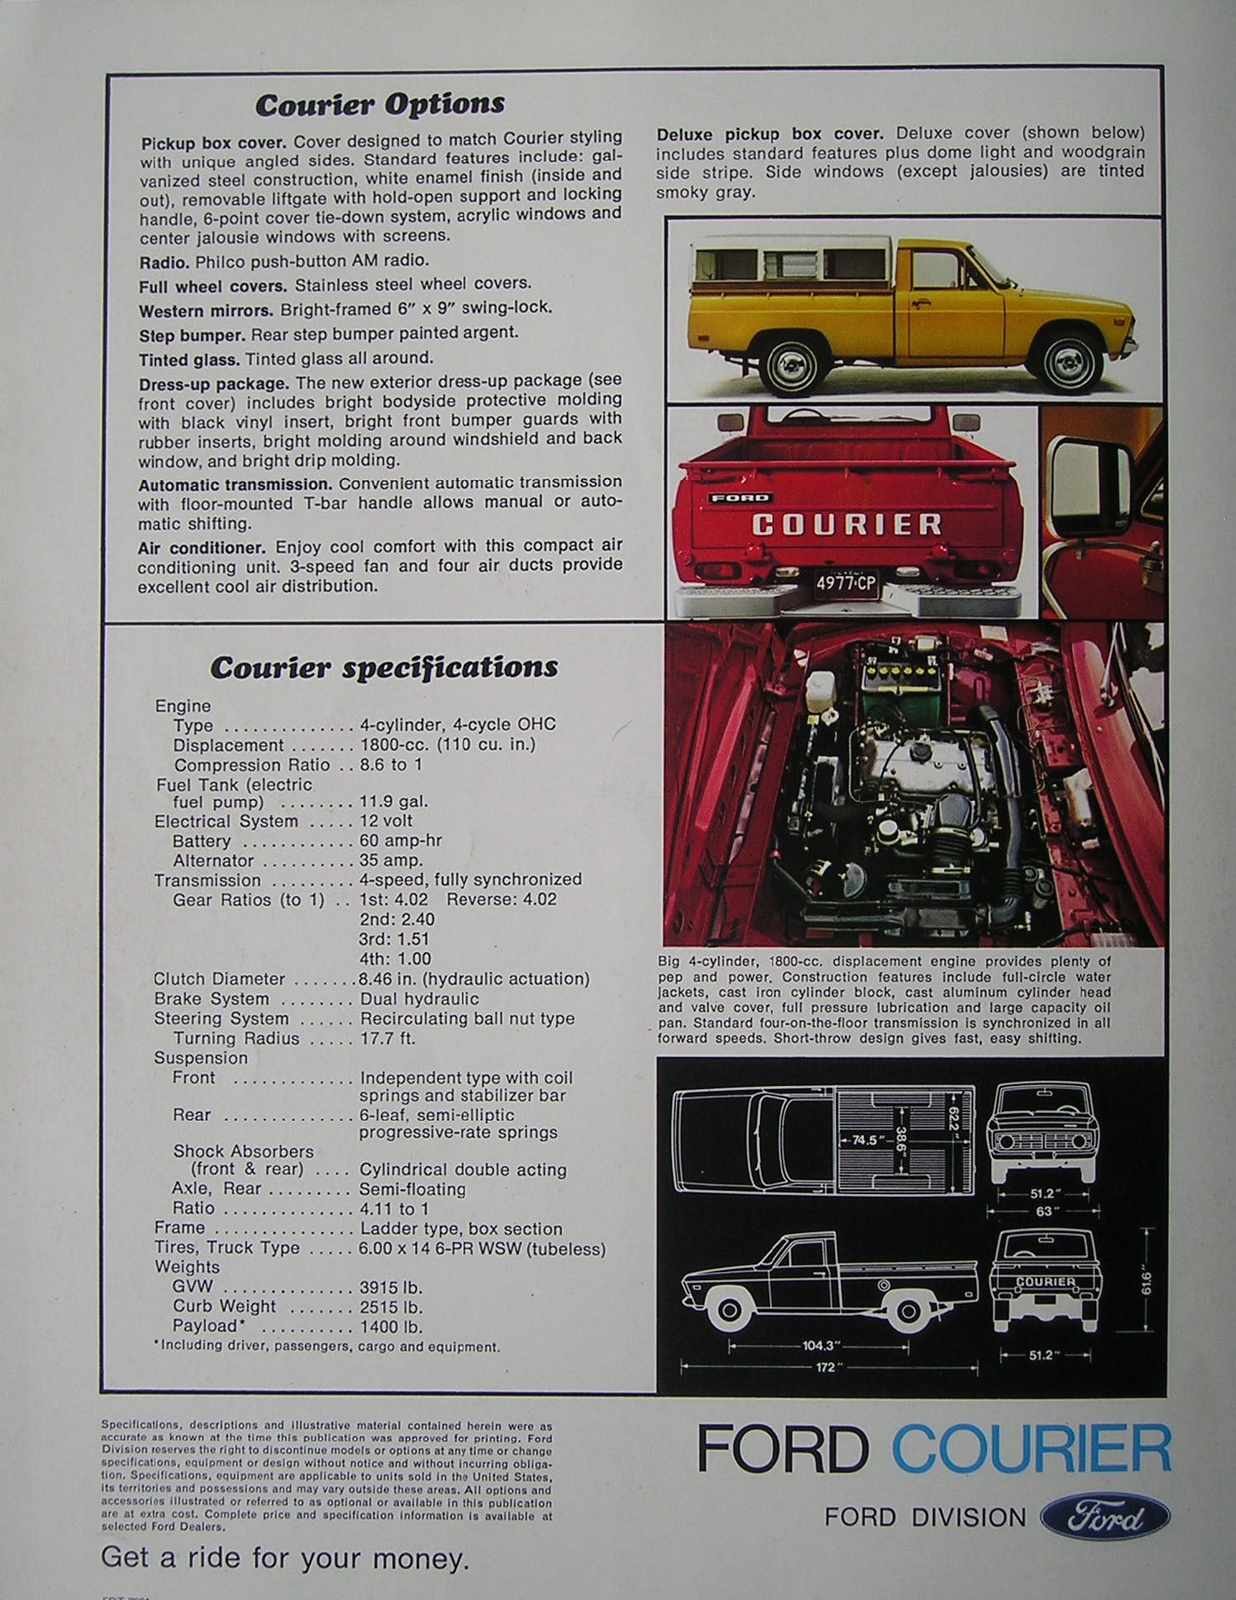 n_1974 Ford Courier-04.jpg